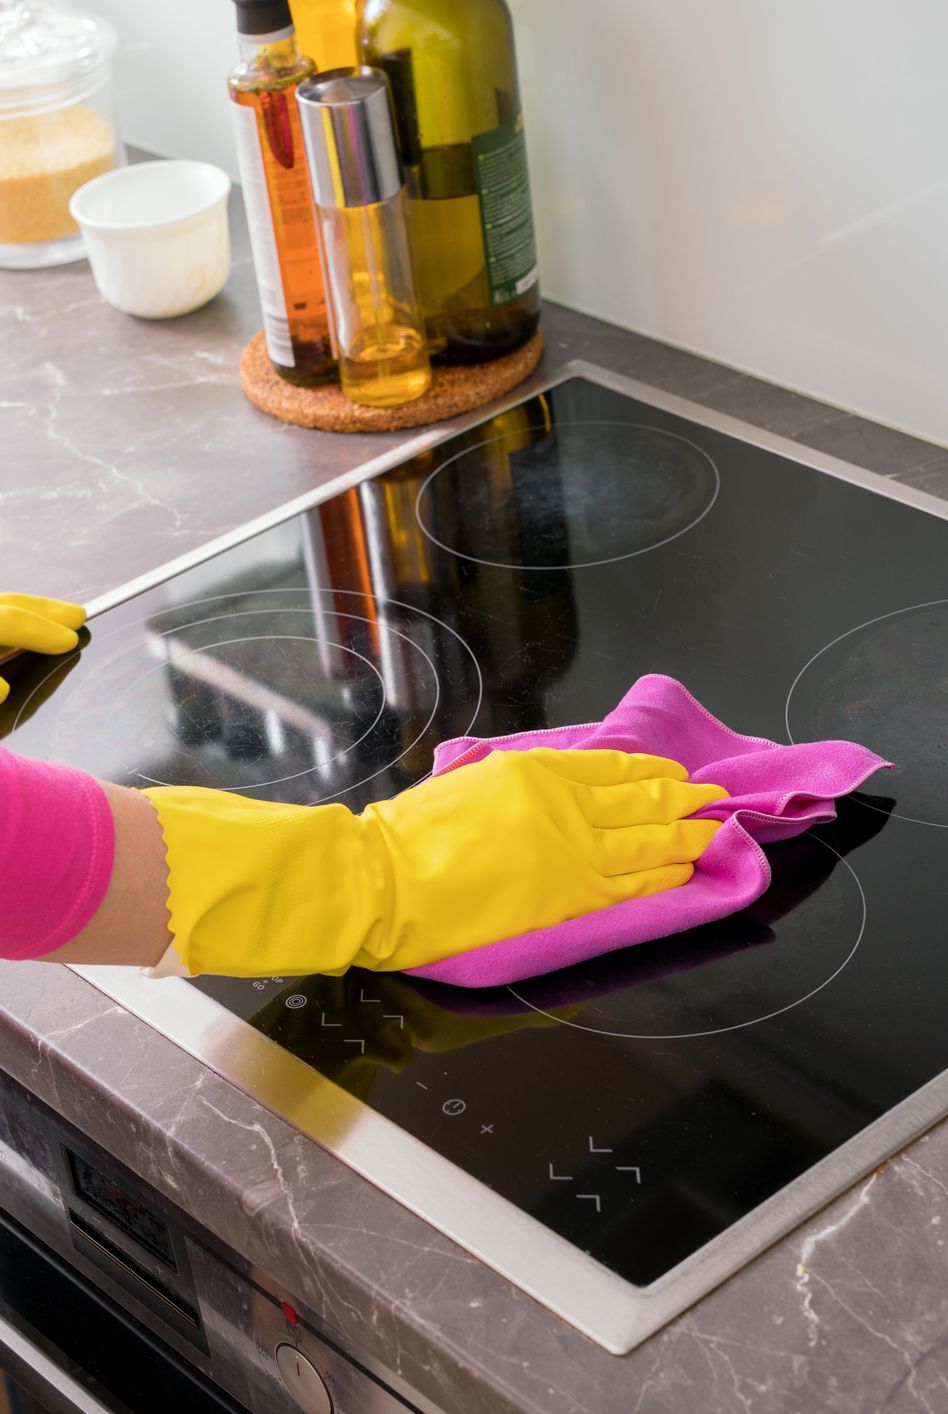 17 Cleaning Tricks for Hard-to-Clean Household Objects